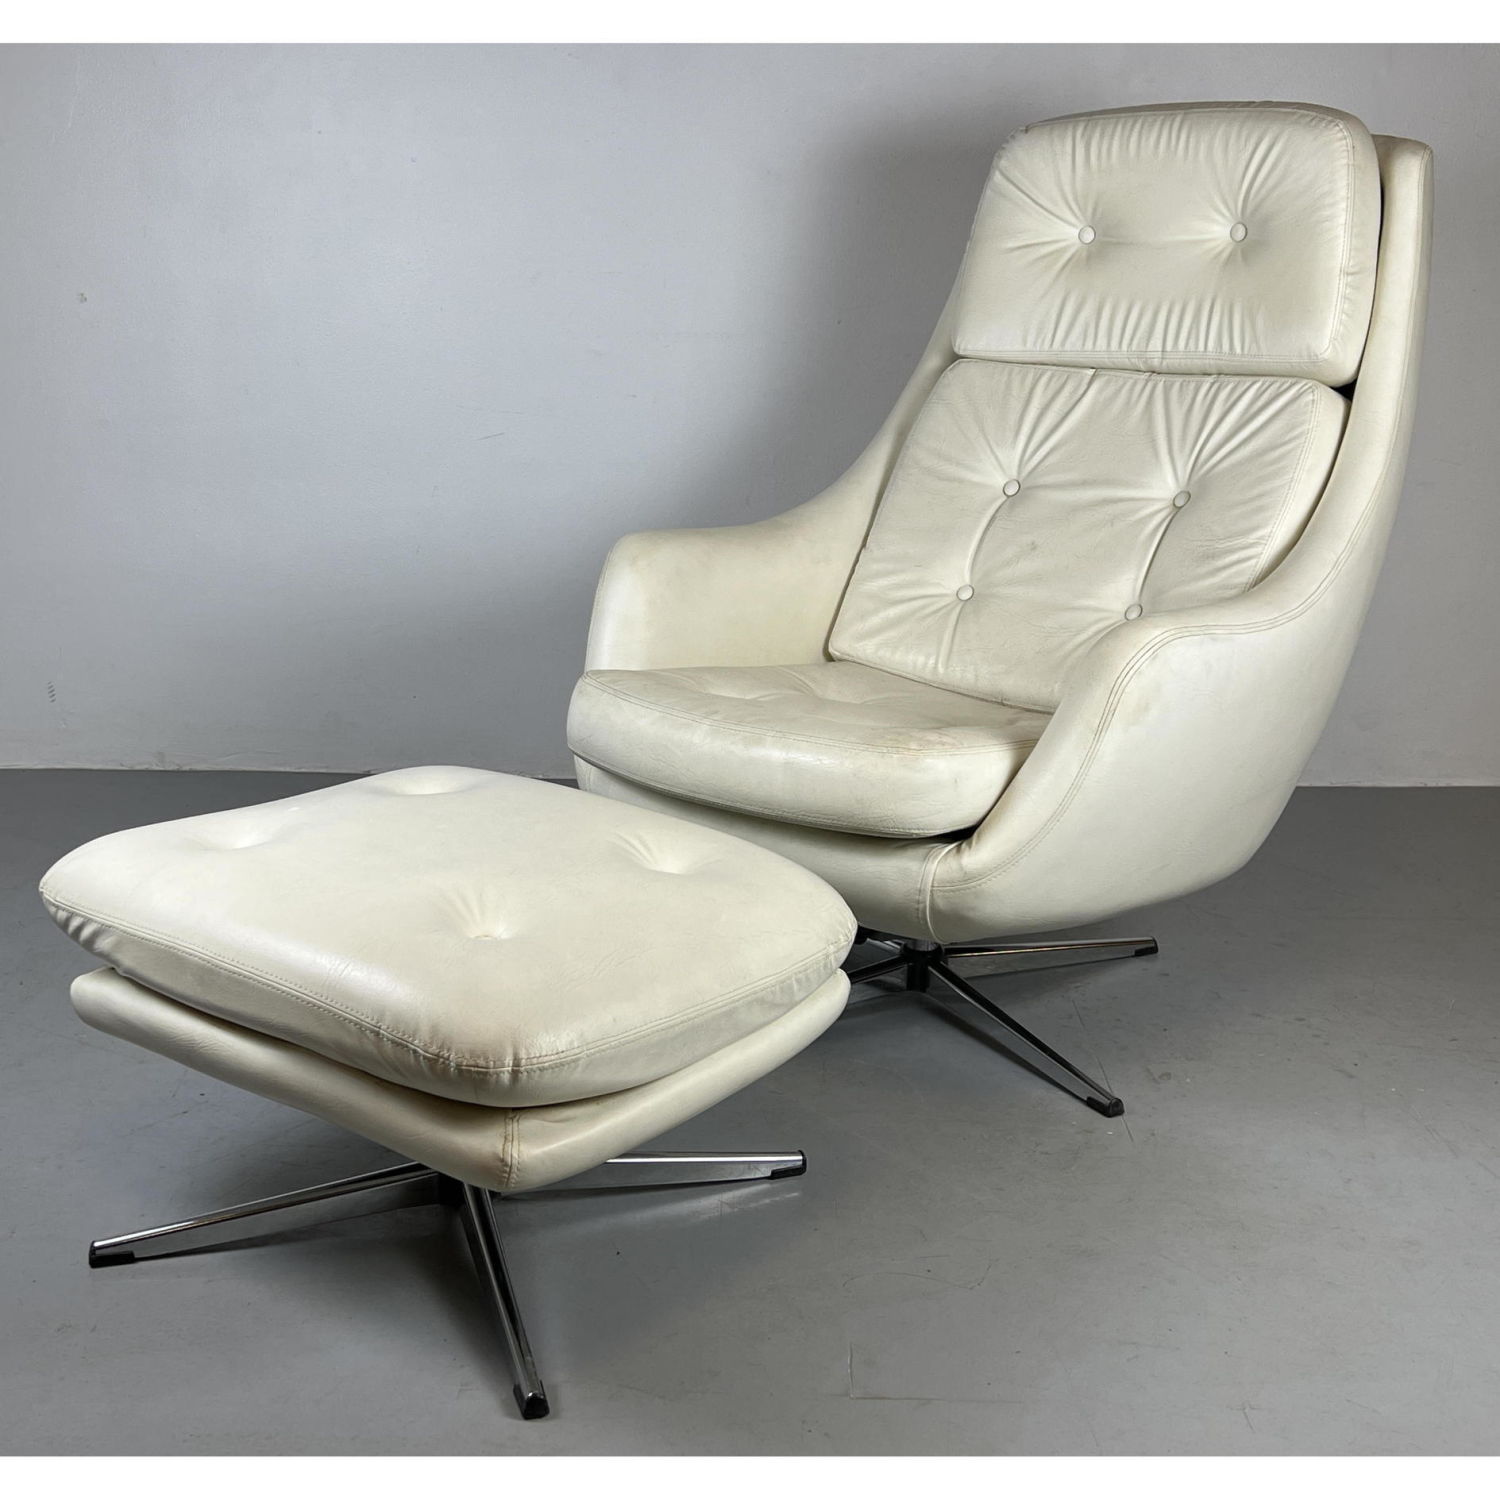 Overman of Sweden Lounge chair 2fe5e0